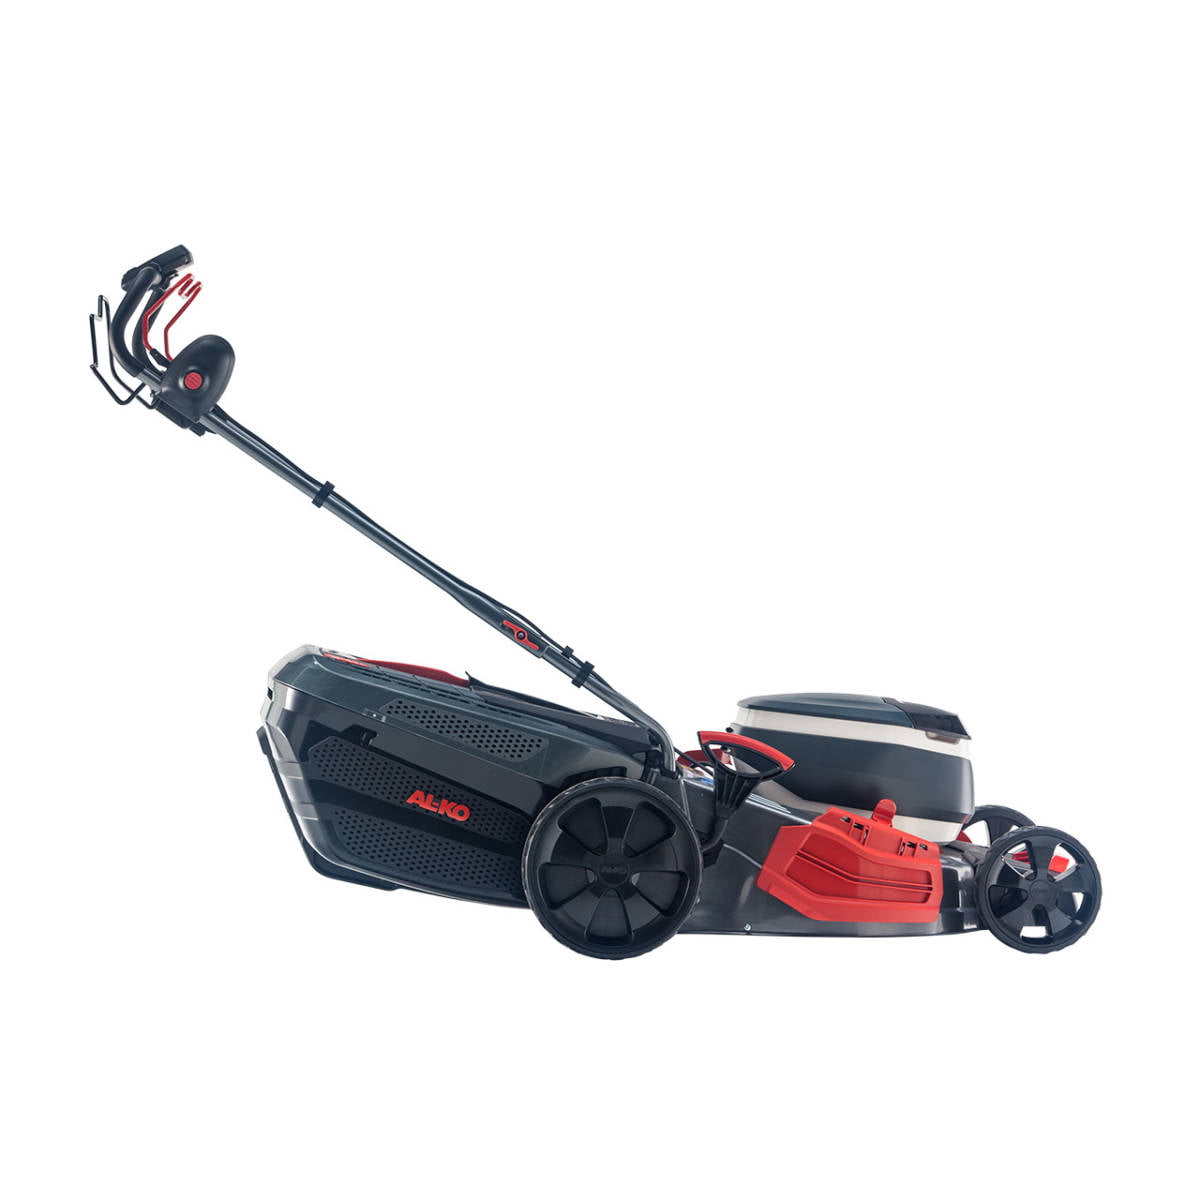 123012-energy-flex-lawnmower-512-li-vs-w-set-with-2-batteries-and-charger 3